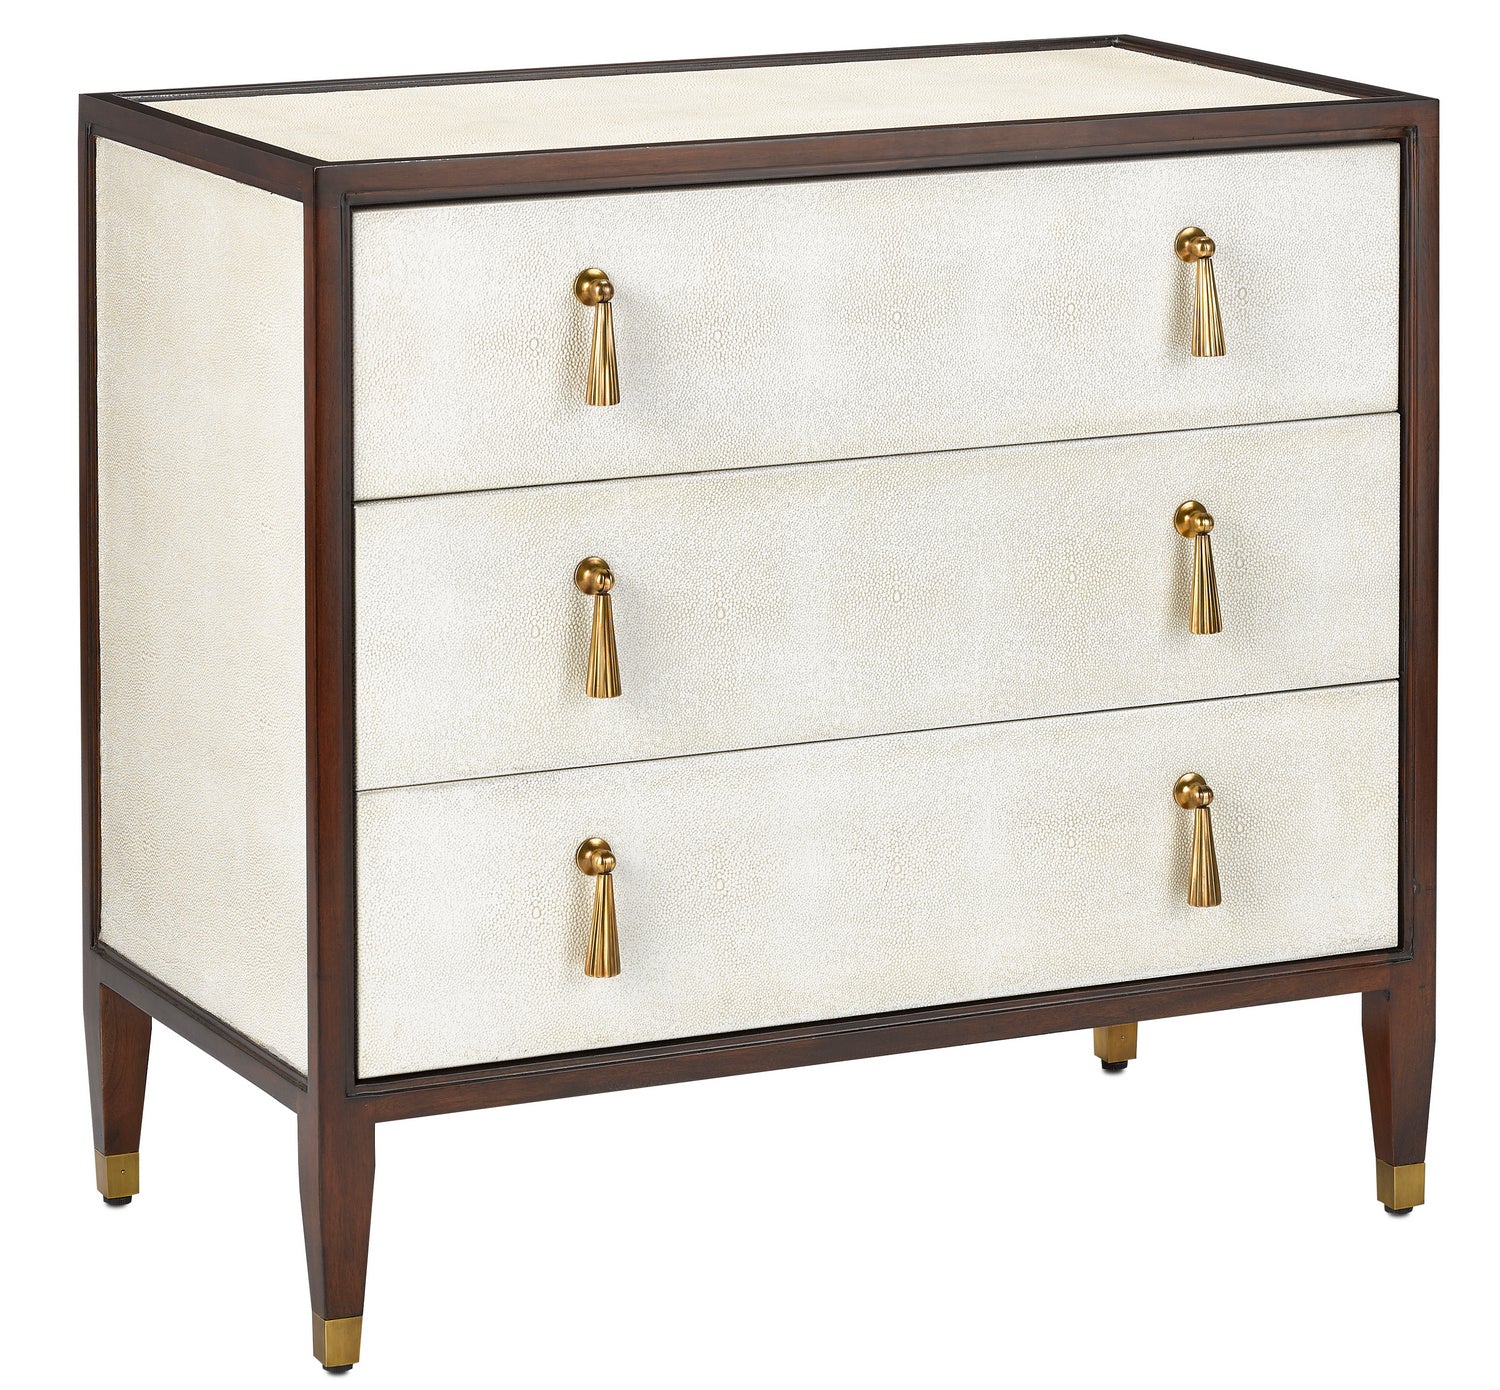 Chest from the Evie collection in Ivory/Dark Walnut/Brass finish